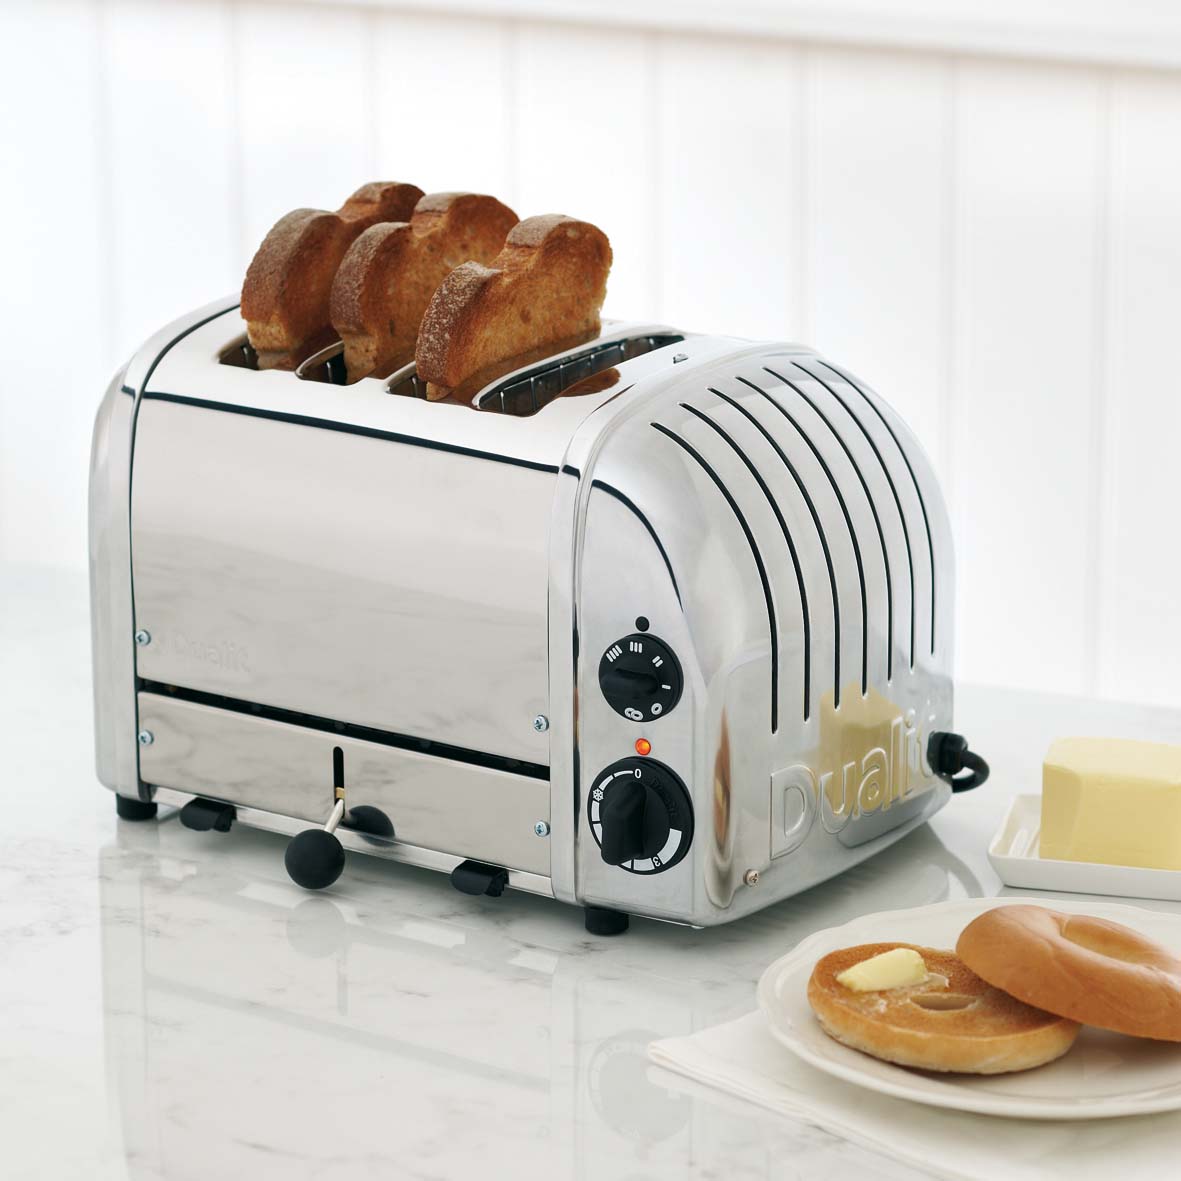 Save energy  today and tomorrow with the NewGen® toaster from Dualit